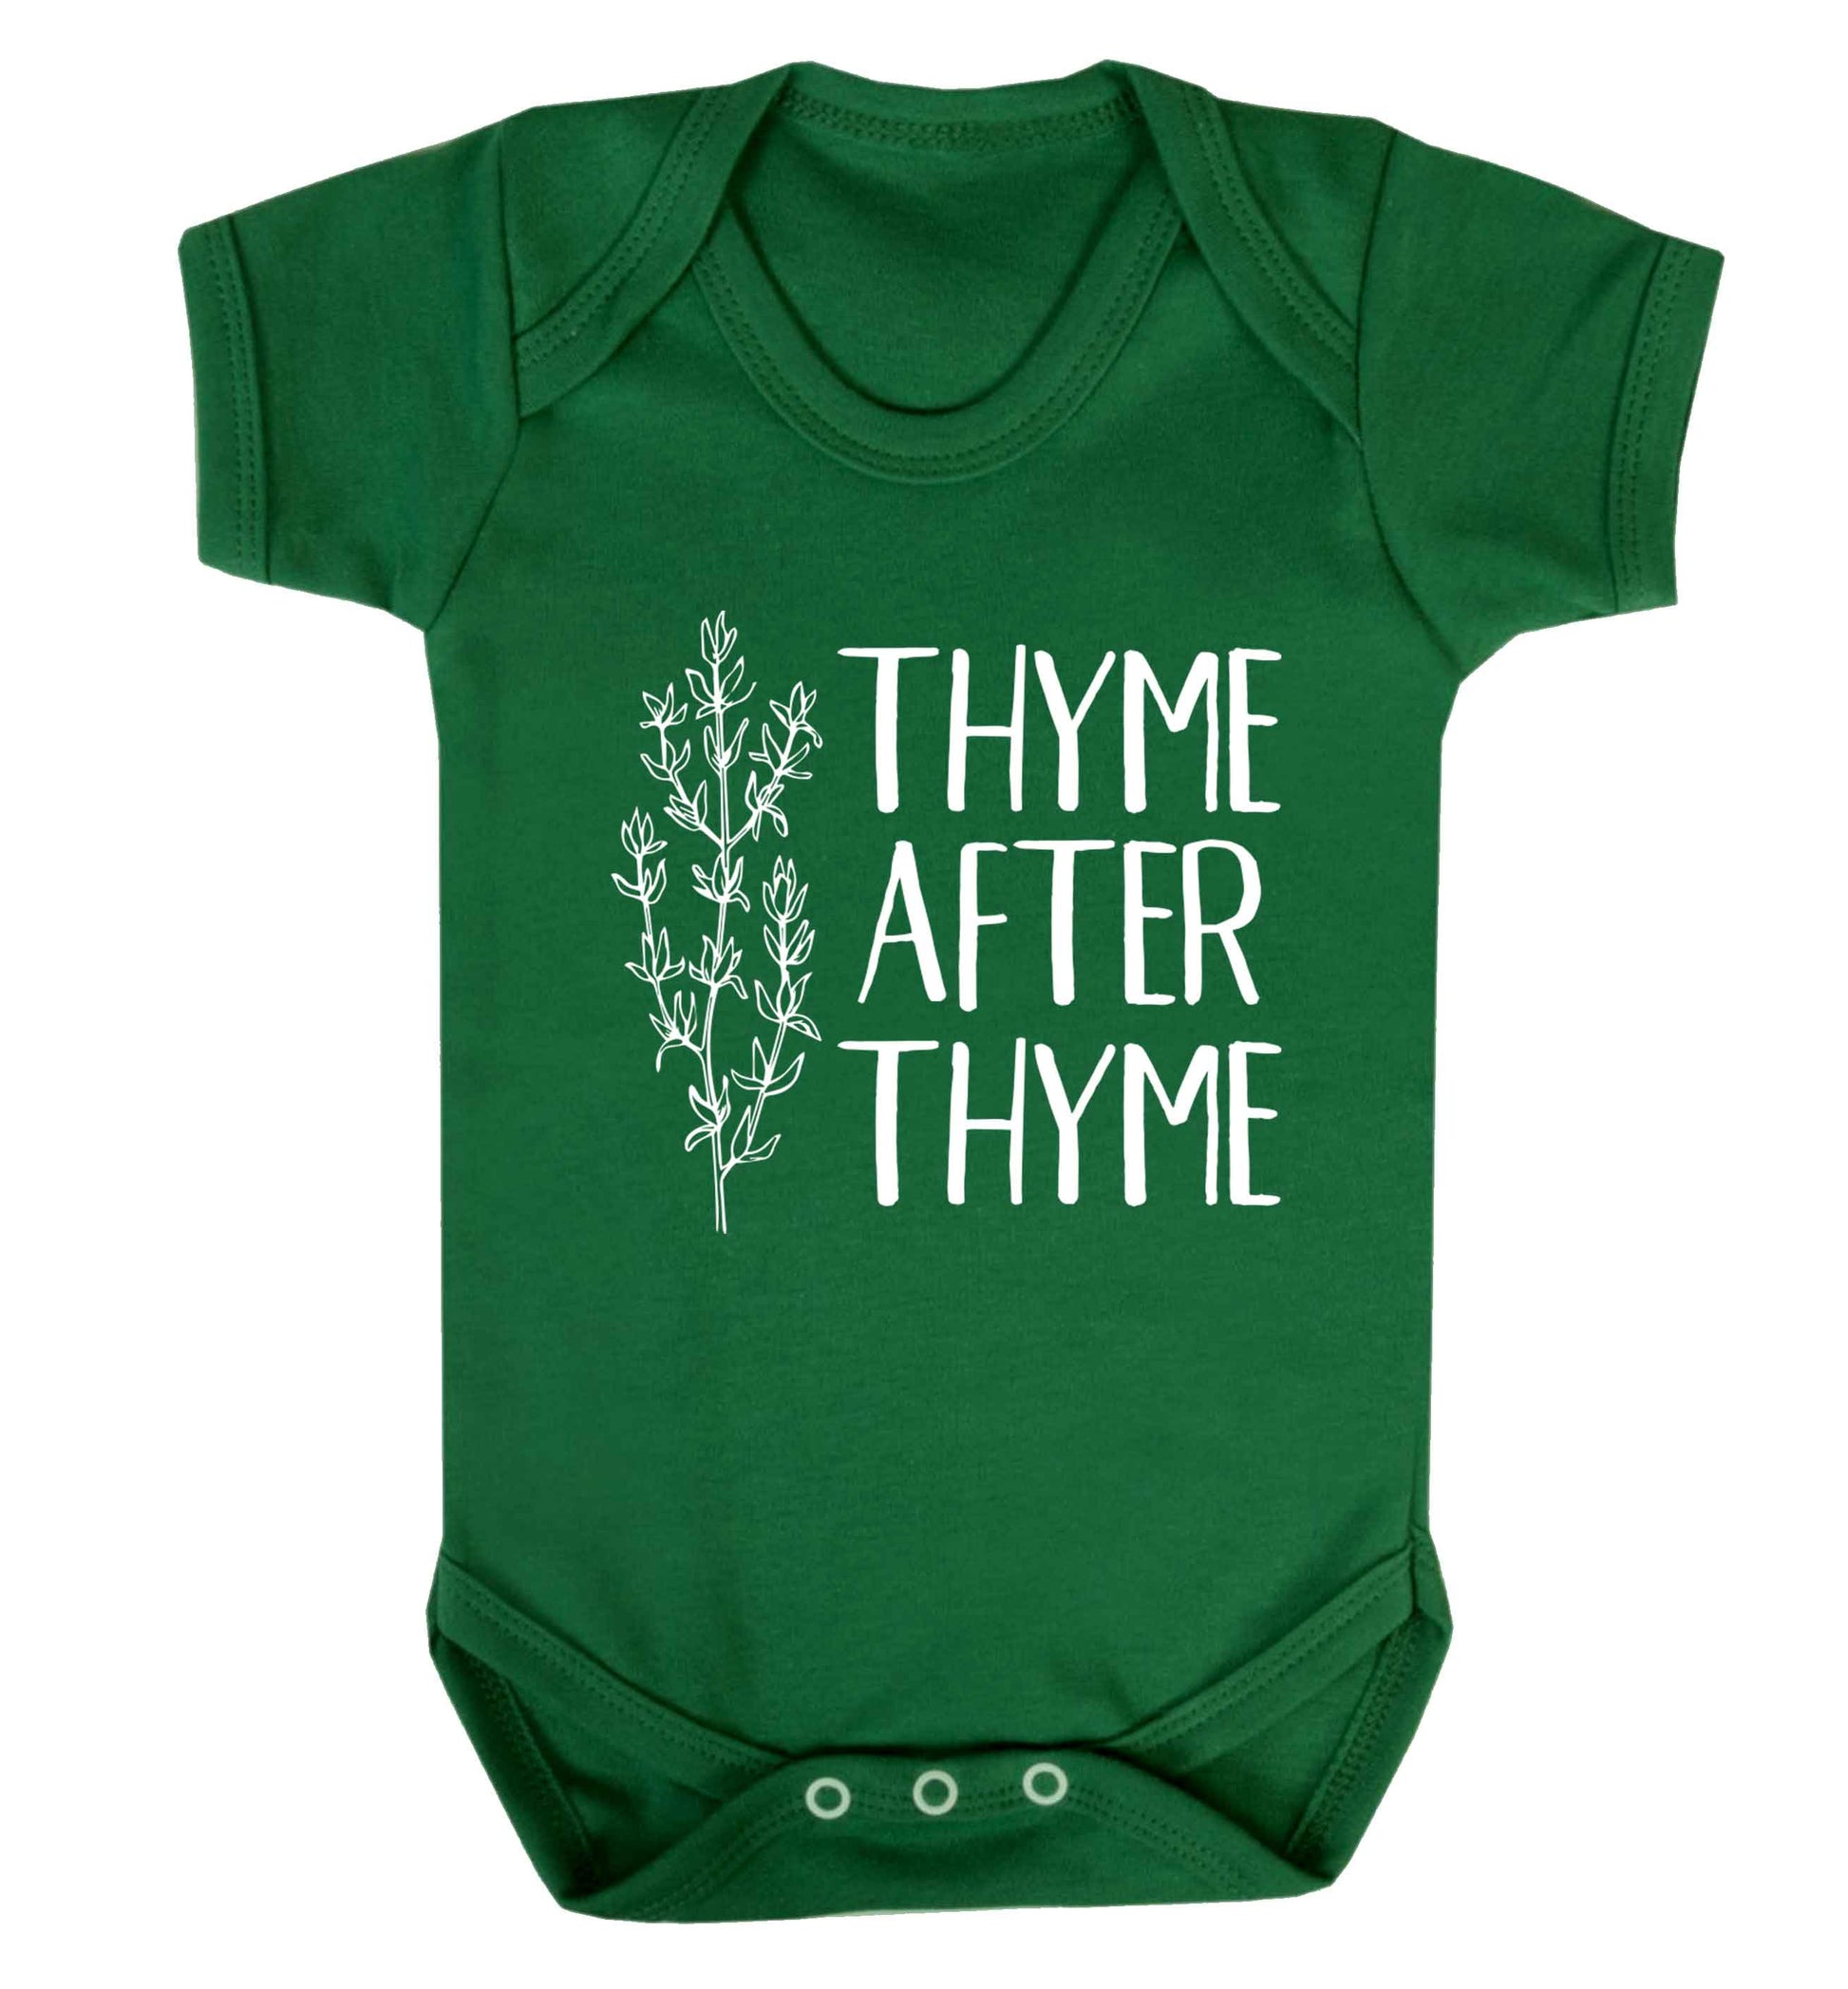 Thyme after thyme Baby Vest green 18-24 months